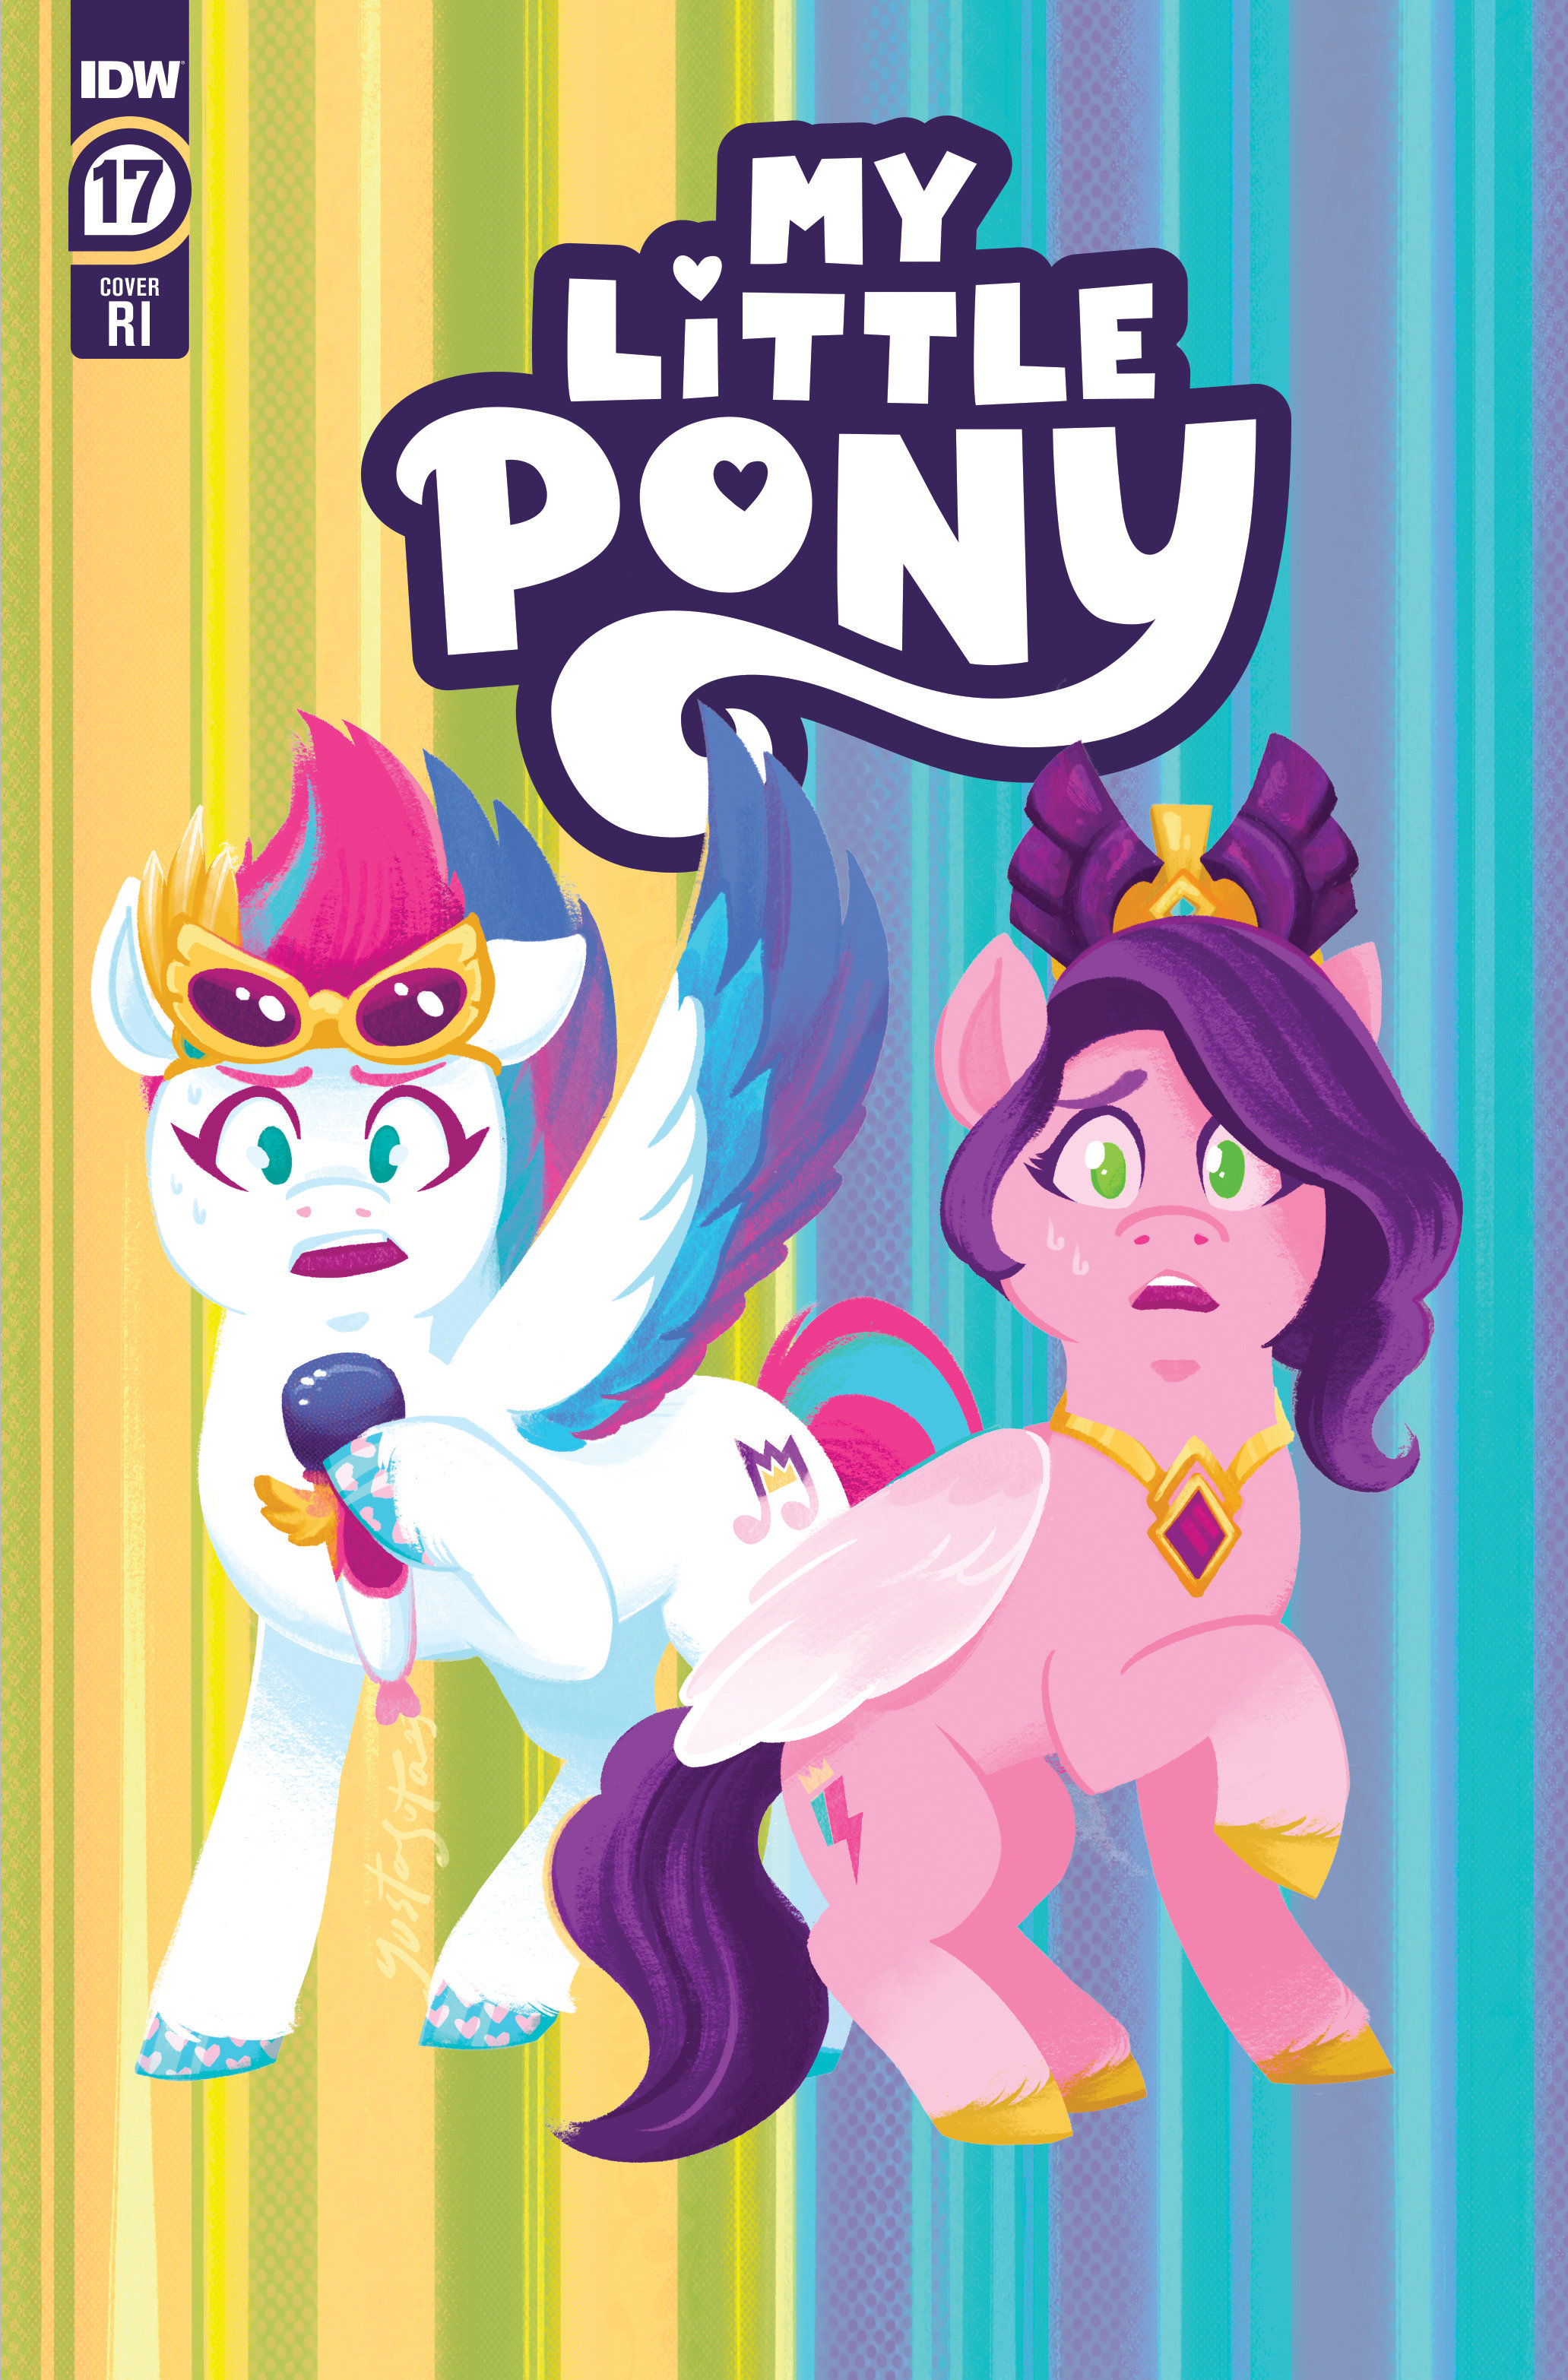 My Little Pony #17 Cover Retailer Incentive Justasuta 1 for 10 Incentive